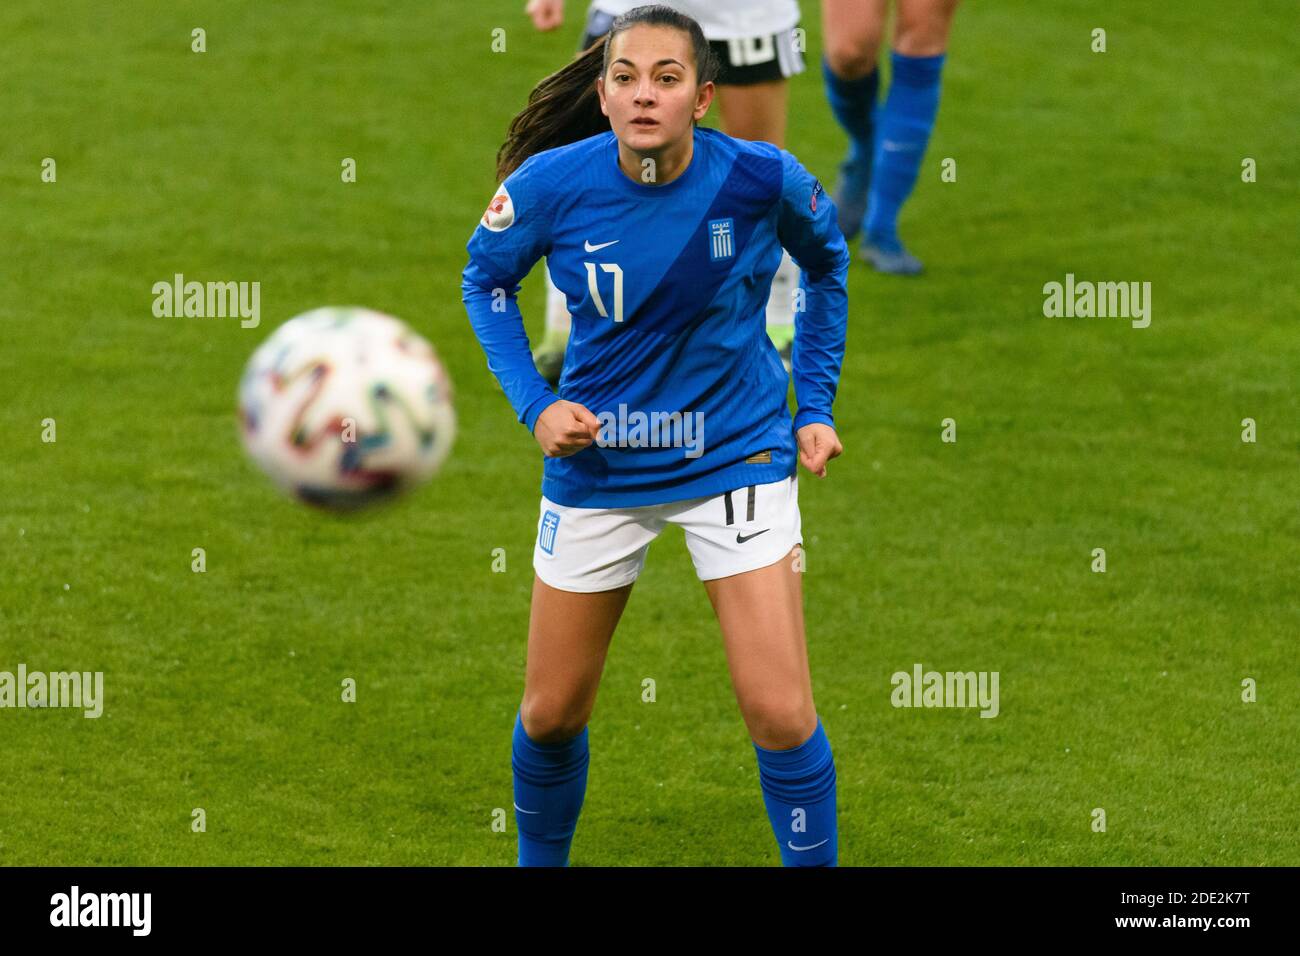 Athanasia Moraitou (#17 Greece) during the UEFA Women's European Championship Qualification match between Germany and Greece. Sven Beyrich/SPP Stock Photo